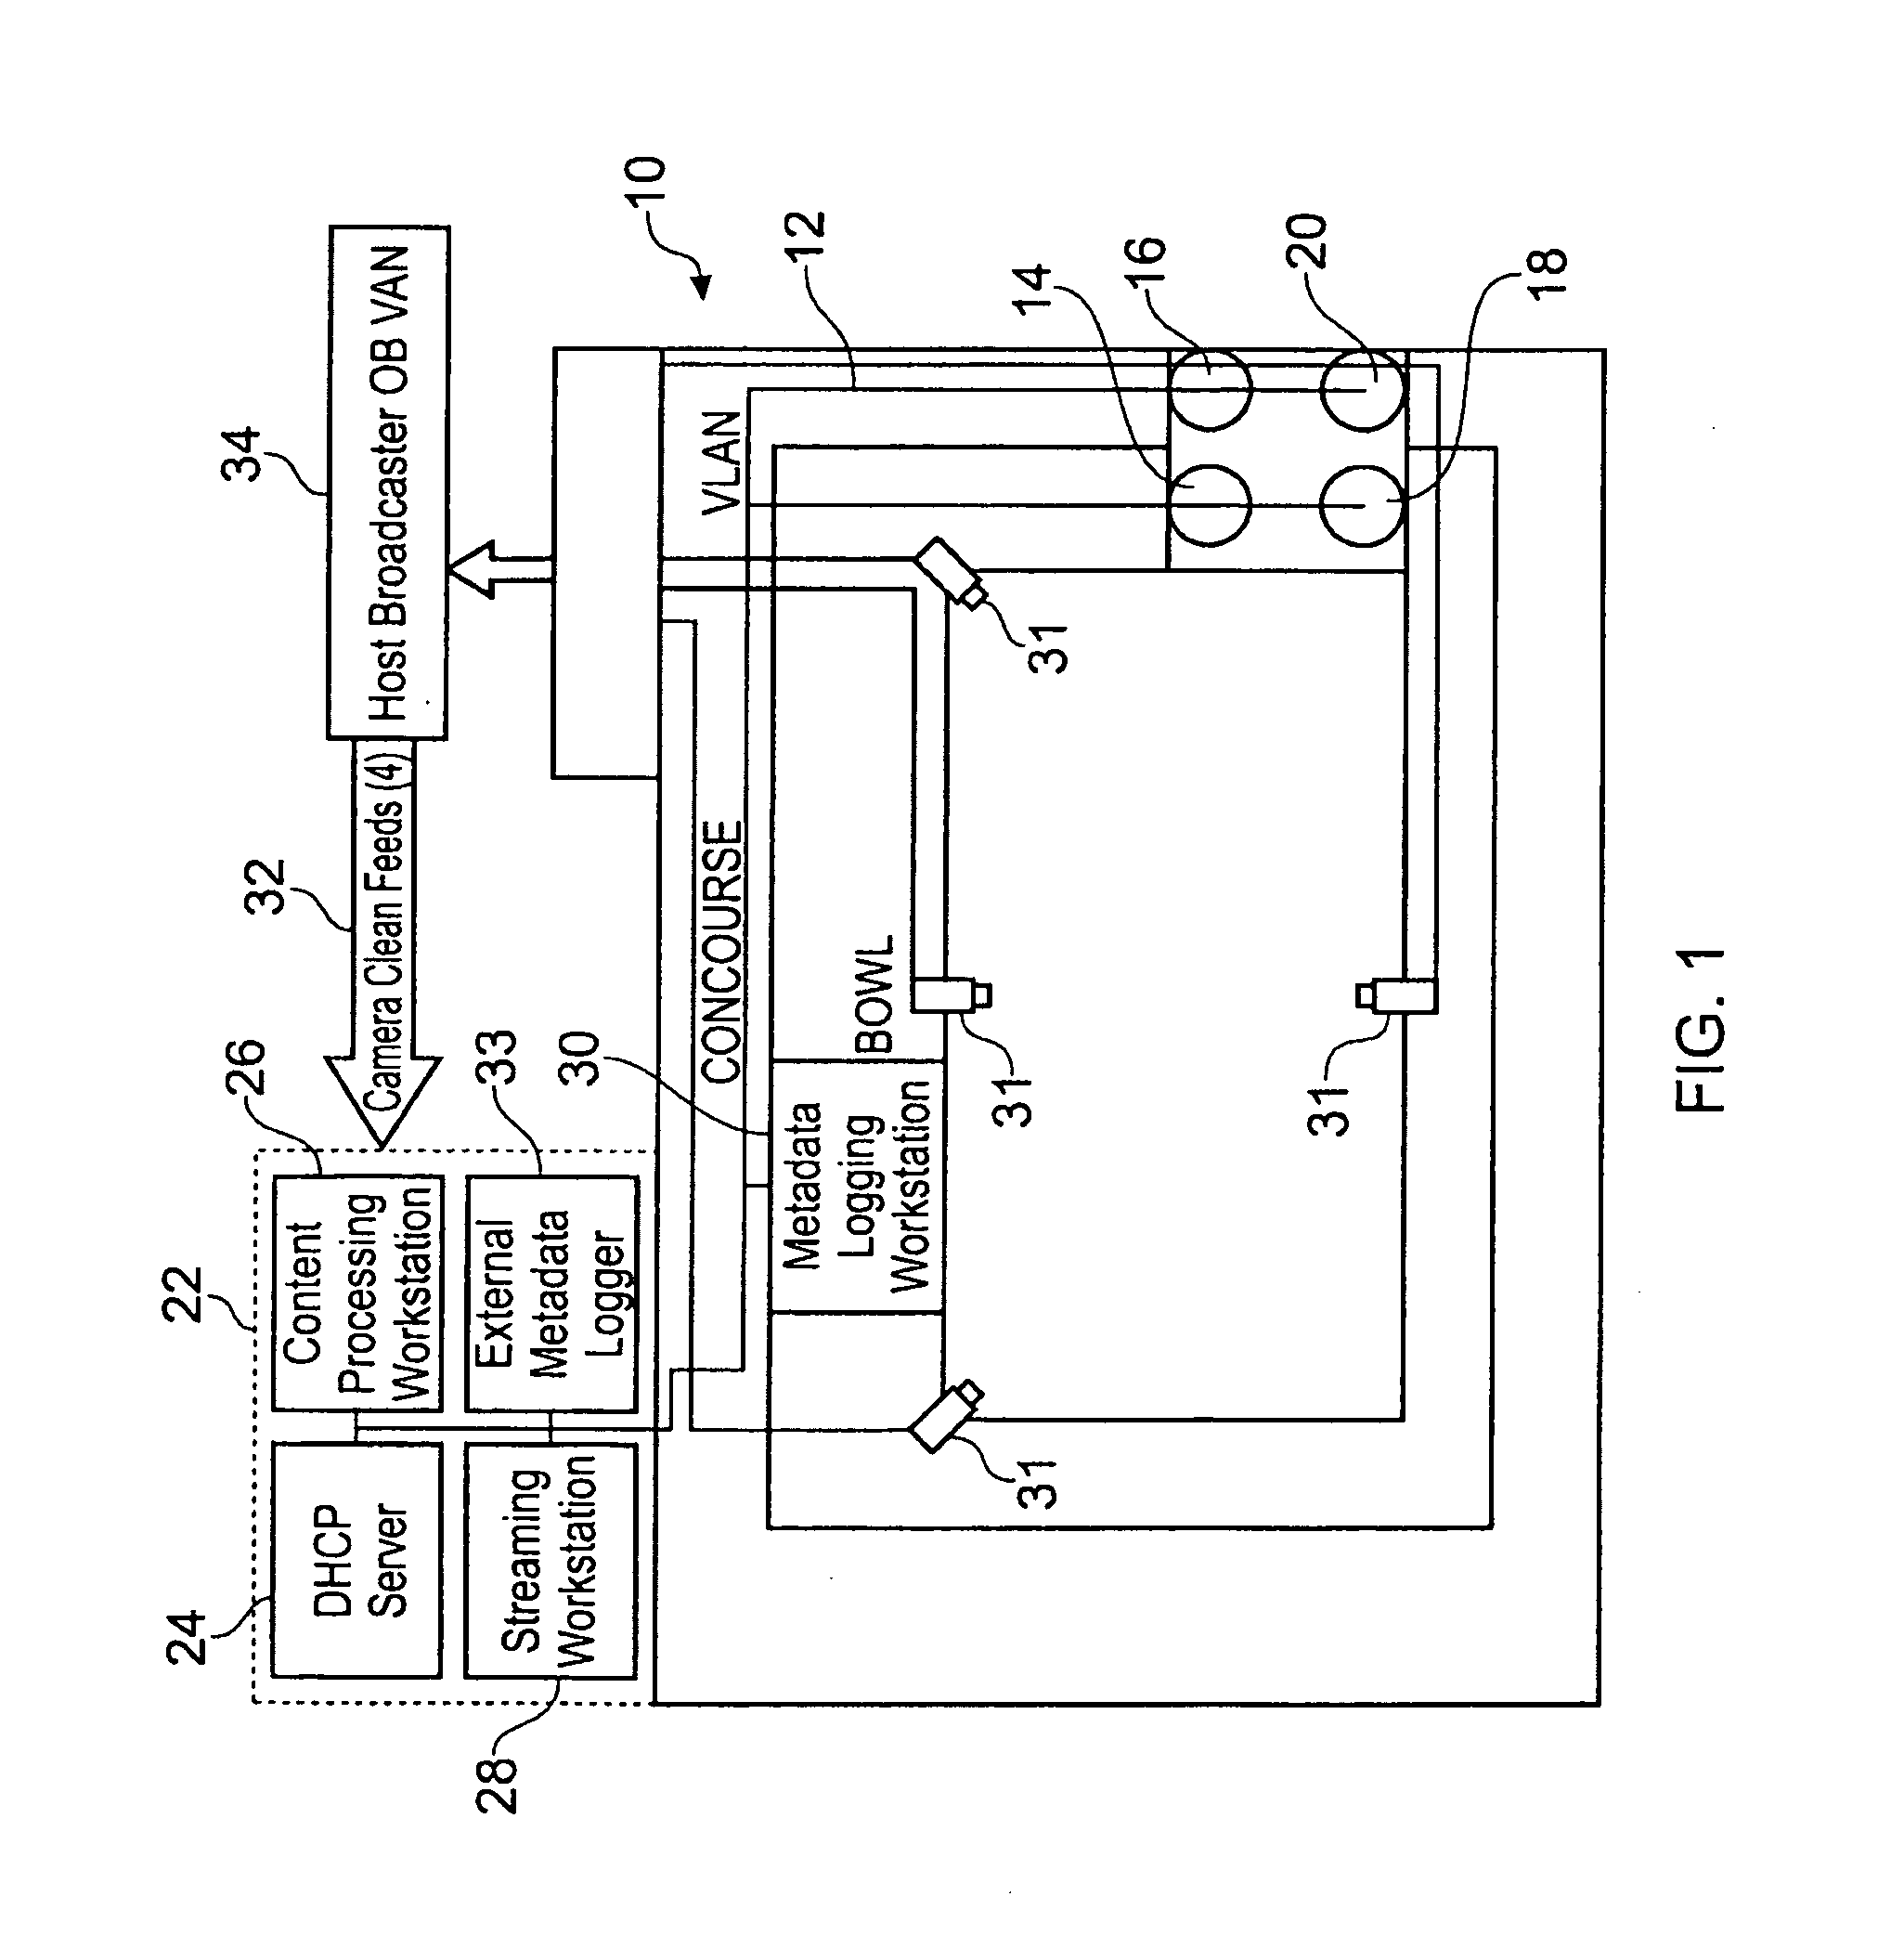 Method of distributing software and a client device having the same